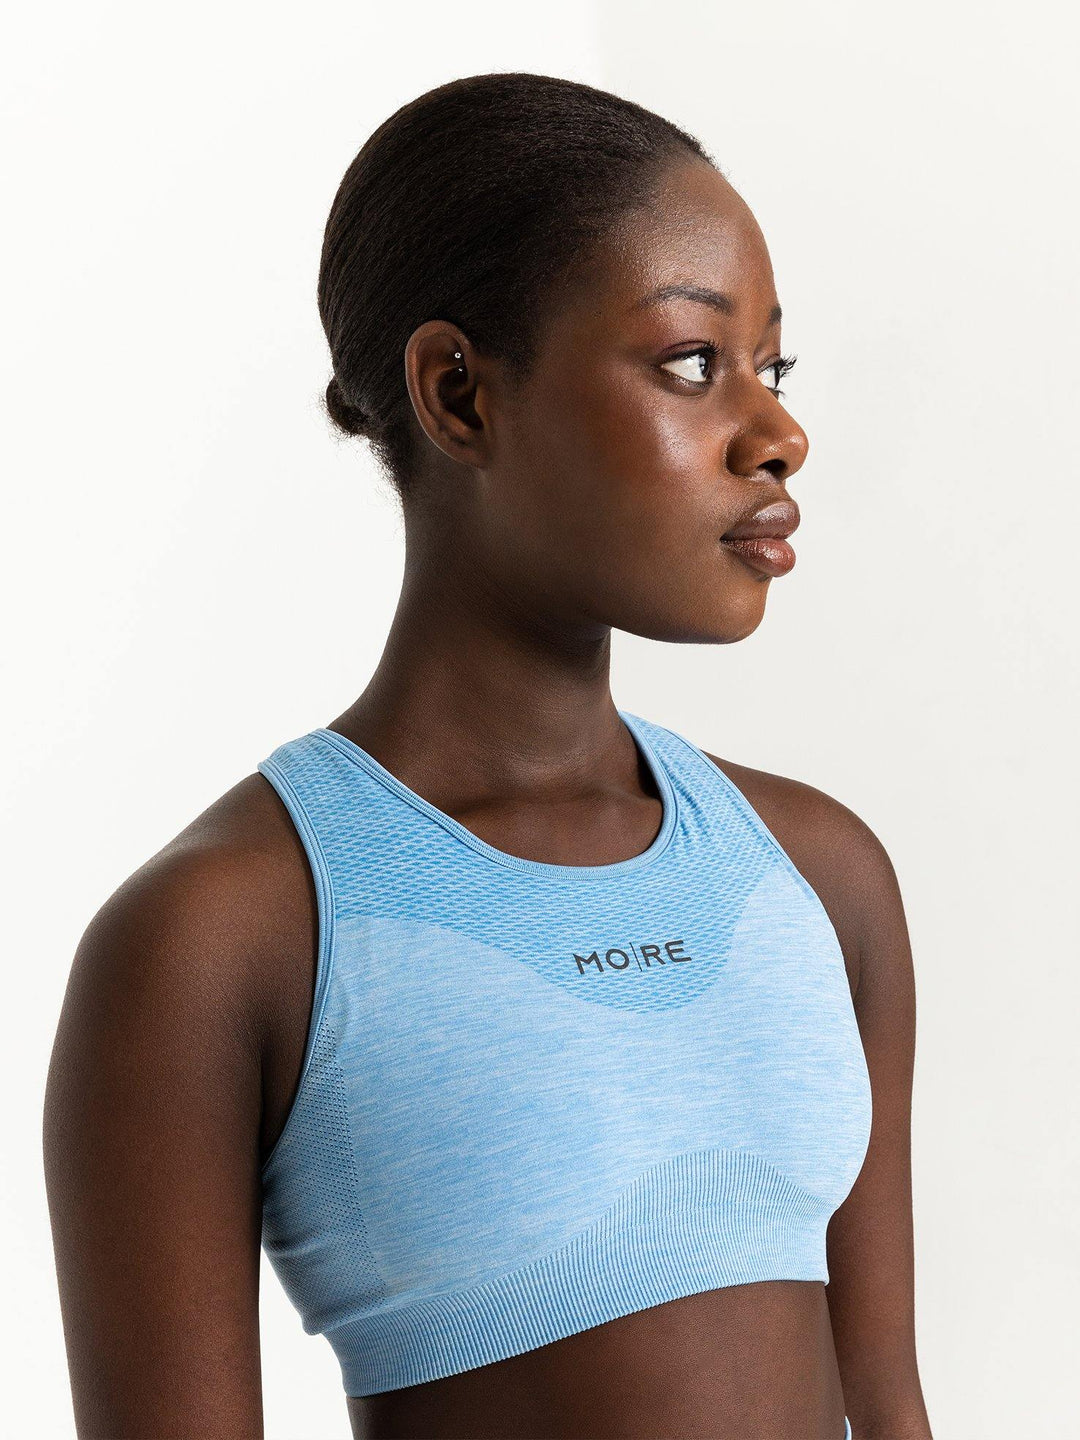 I Created A Product To Revolutionize The Sports Bra Market